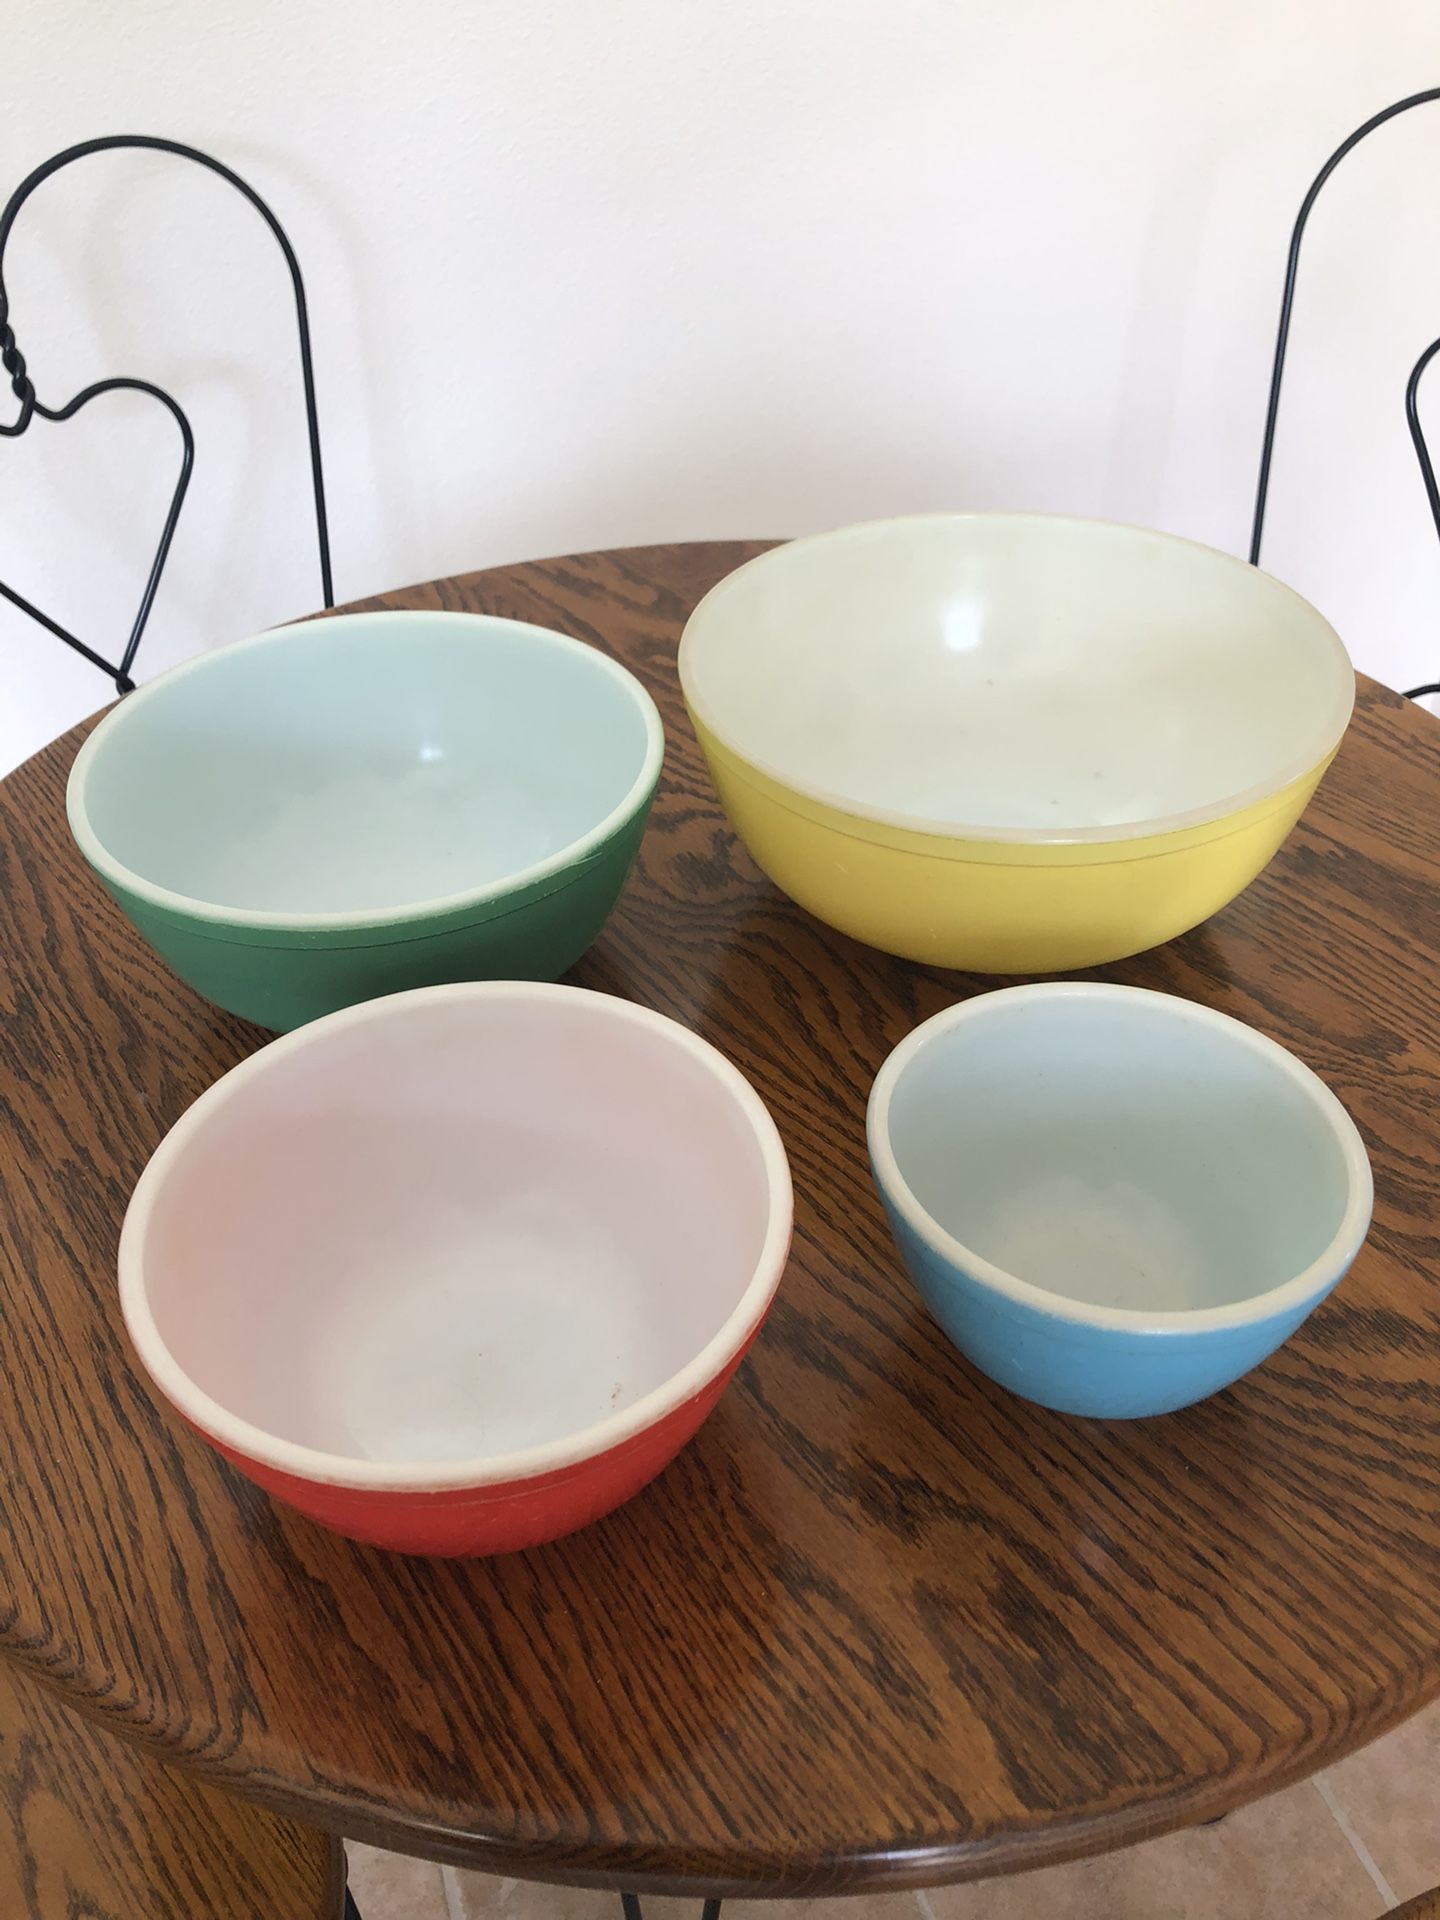 Vintage Pyrex Stacking Nesting Mixing Bowls Set in Primary Colors